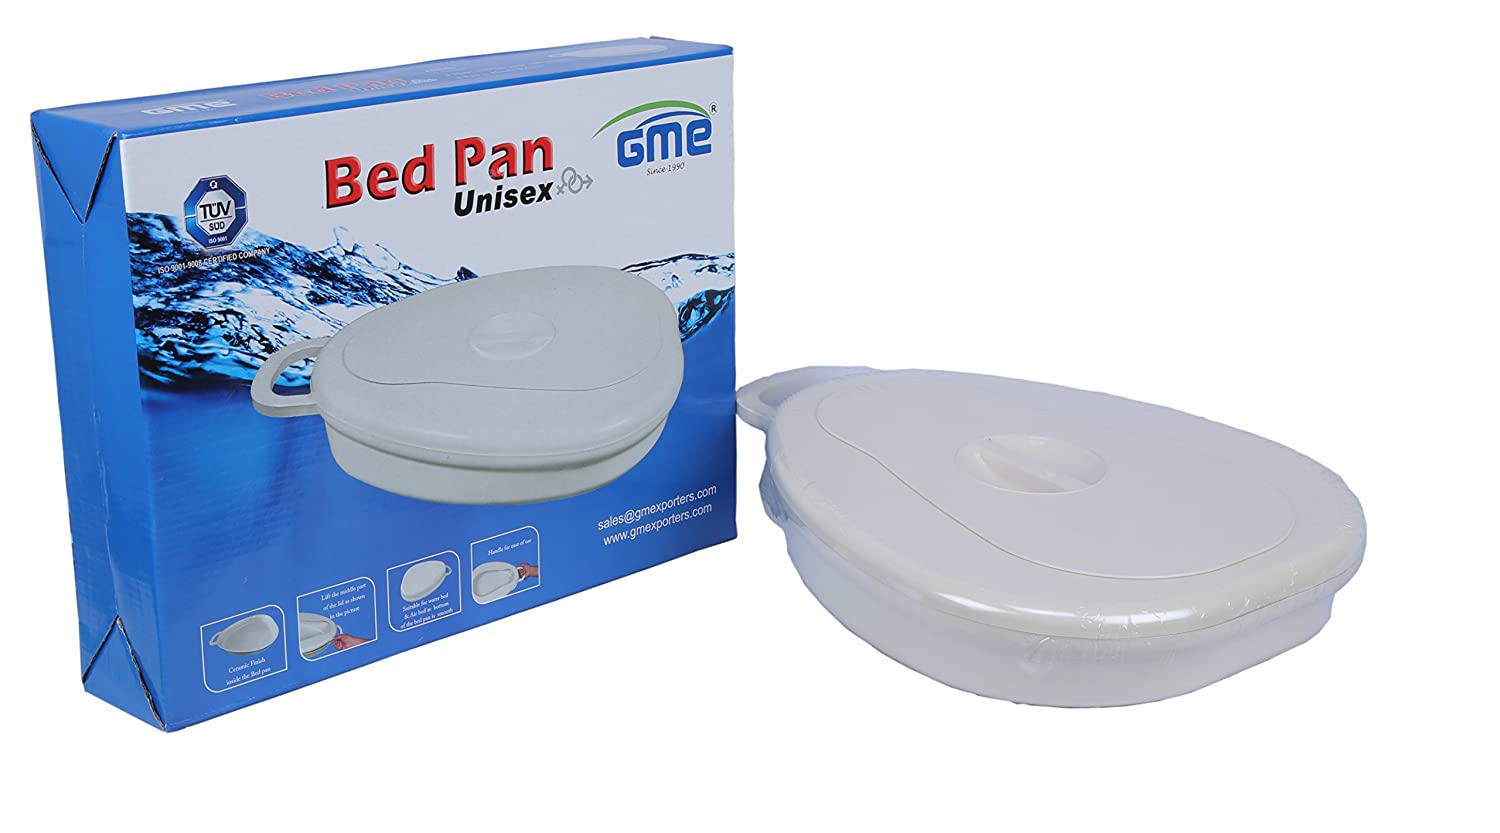 BED PAN unisex for both male and female patient bedpan.